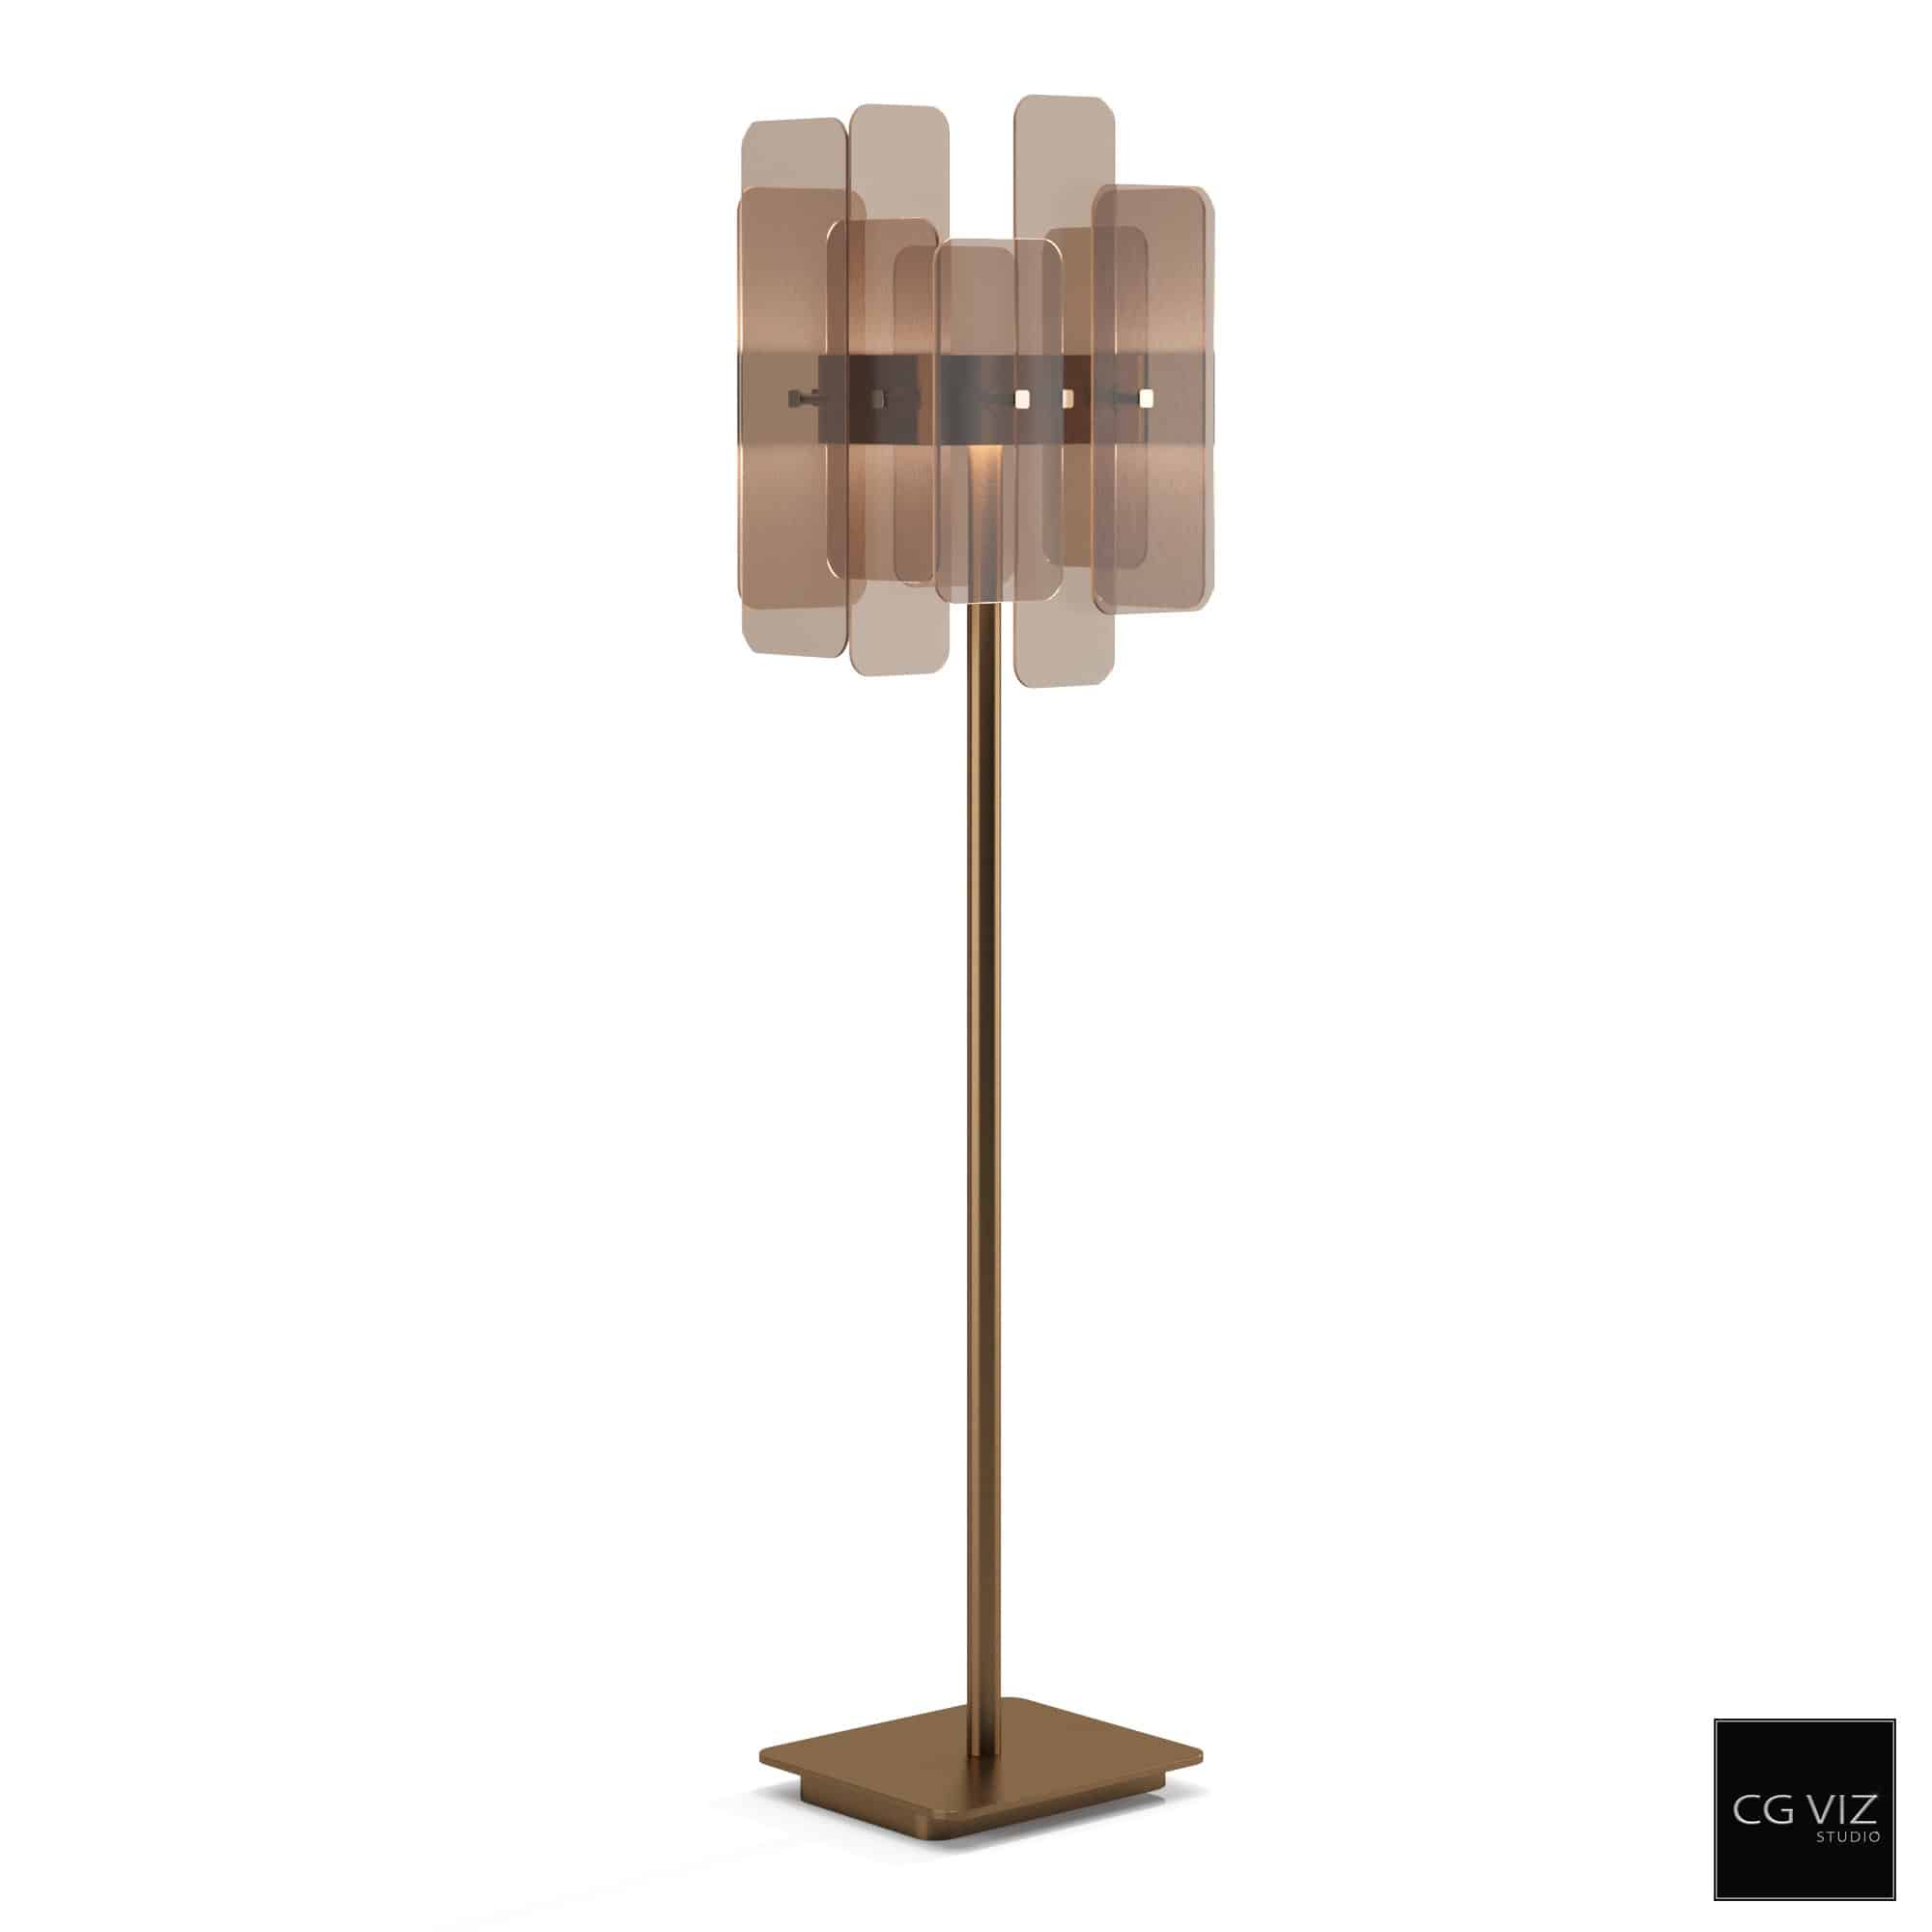 Rendered Preview of Archiproduct Sicis Oscar Floor Lamp 3D Model